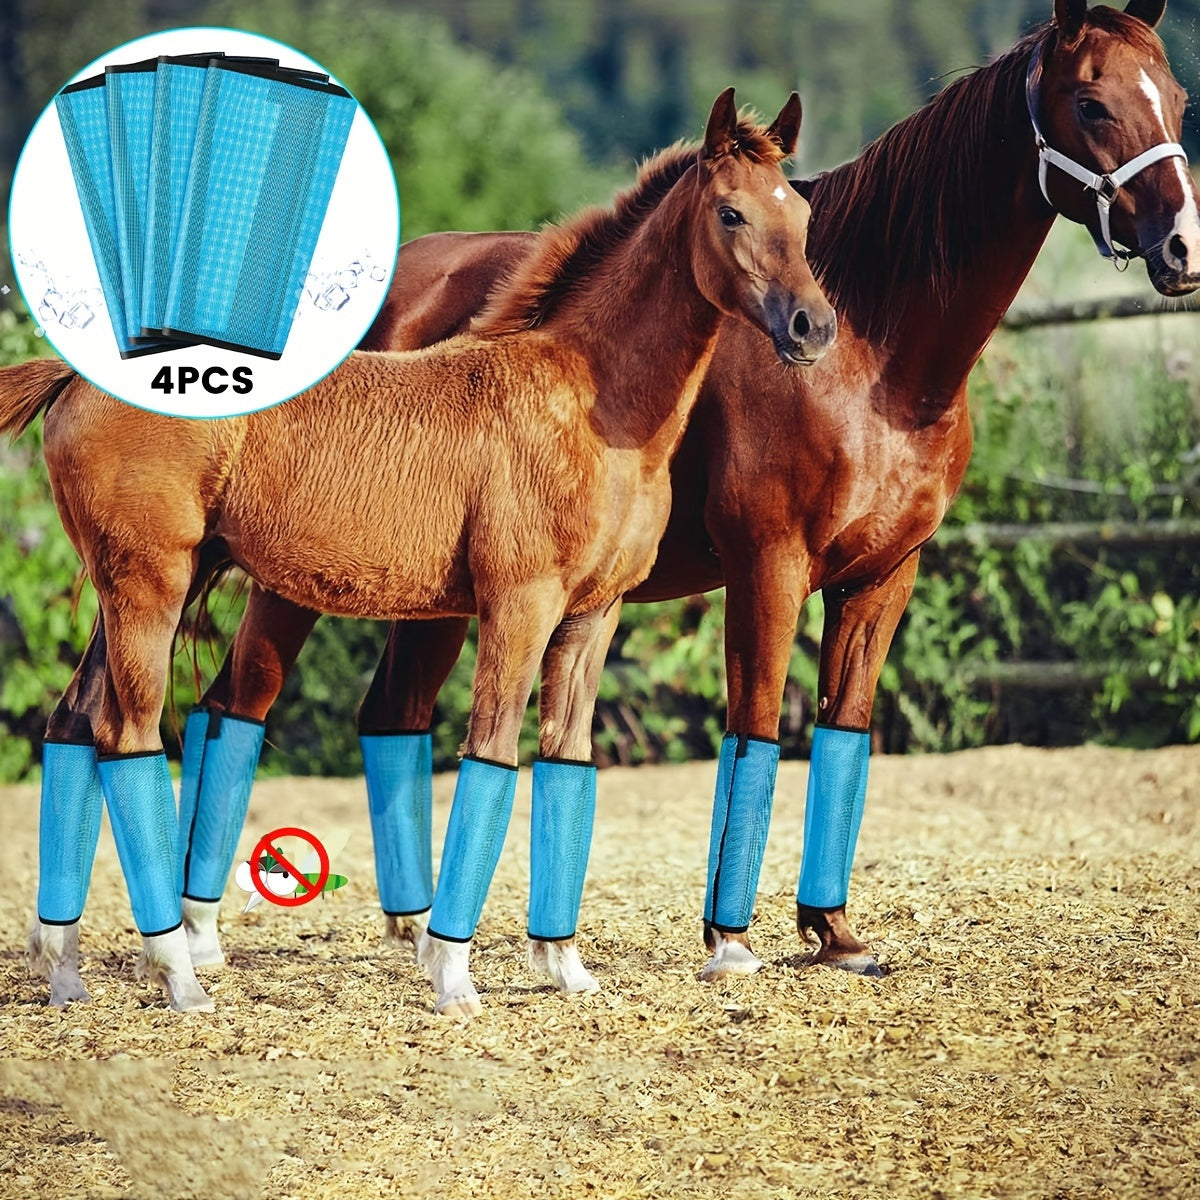 4pcs Adjustable Horse Fly Boots, Breathable PVC Mesh Leggings With Fly Masks, Anti-Slip Protection To Reduce Stomping, Hoof Damage, And Leg Fatigue